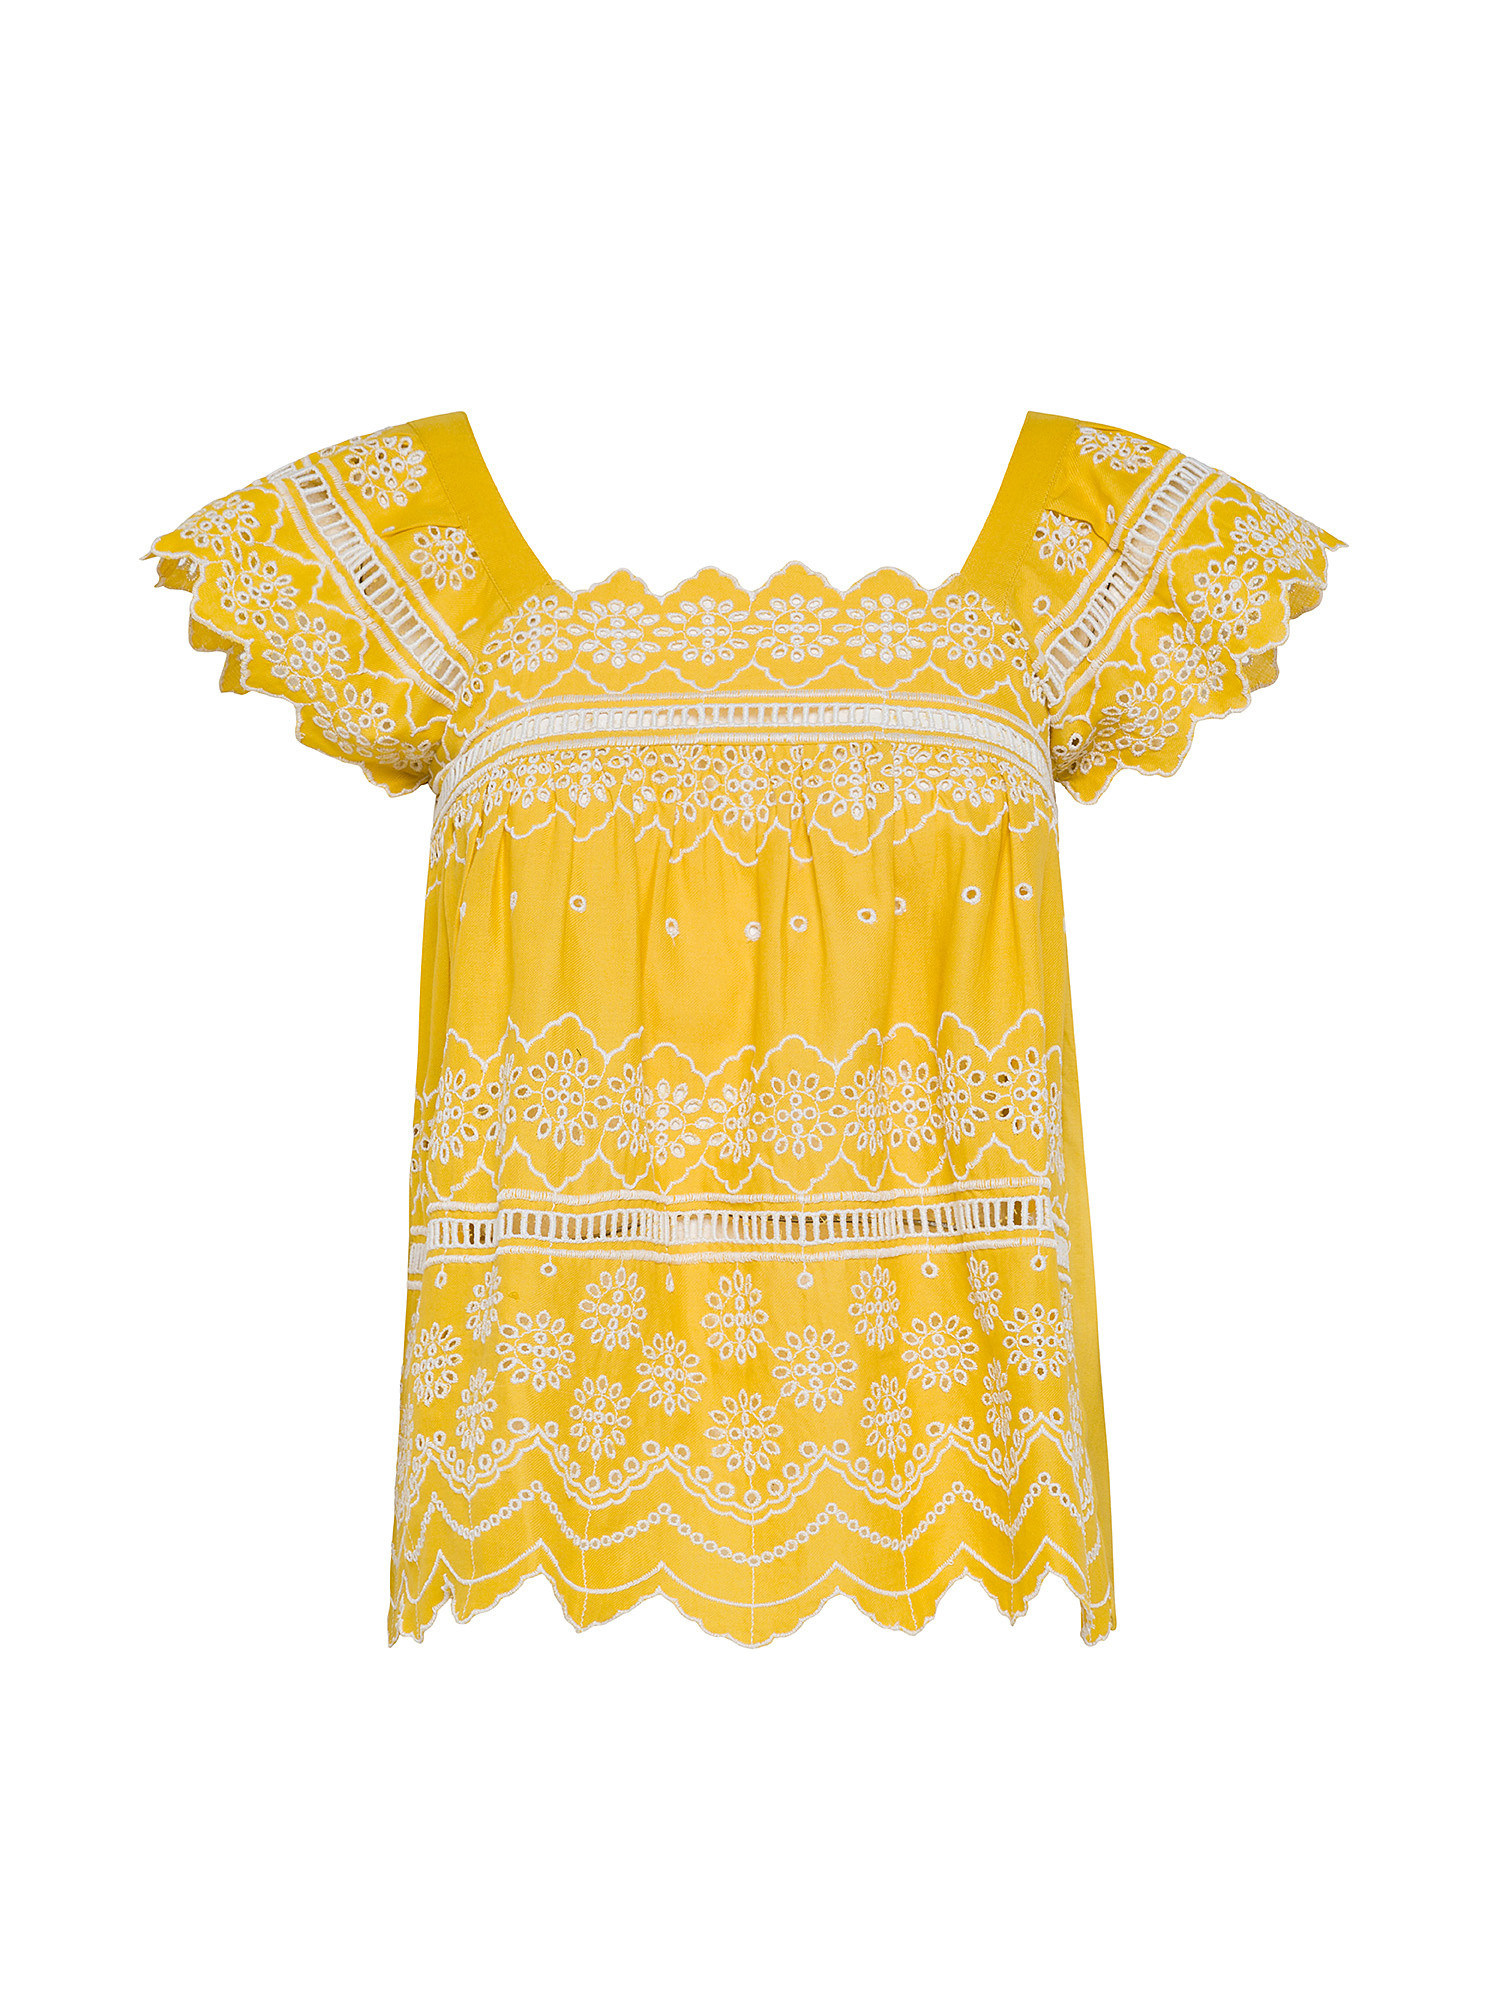 Koan - Cotton T-shirt with embroidery, Yellow, large image number 0